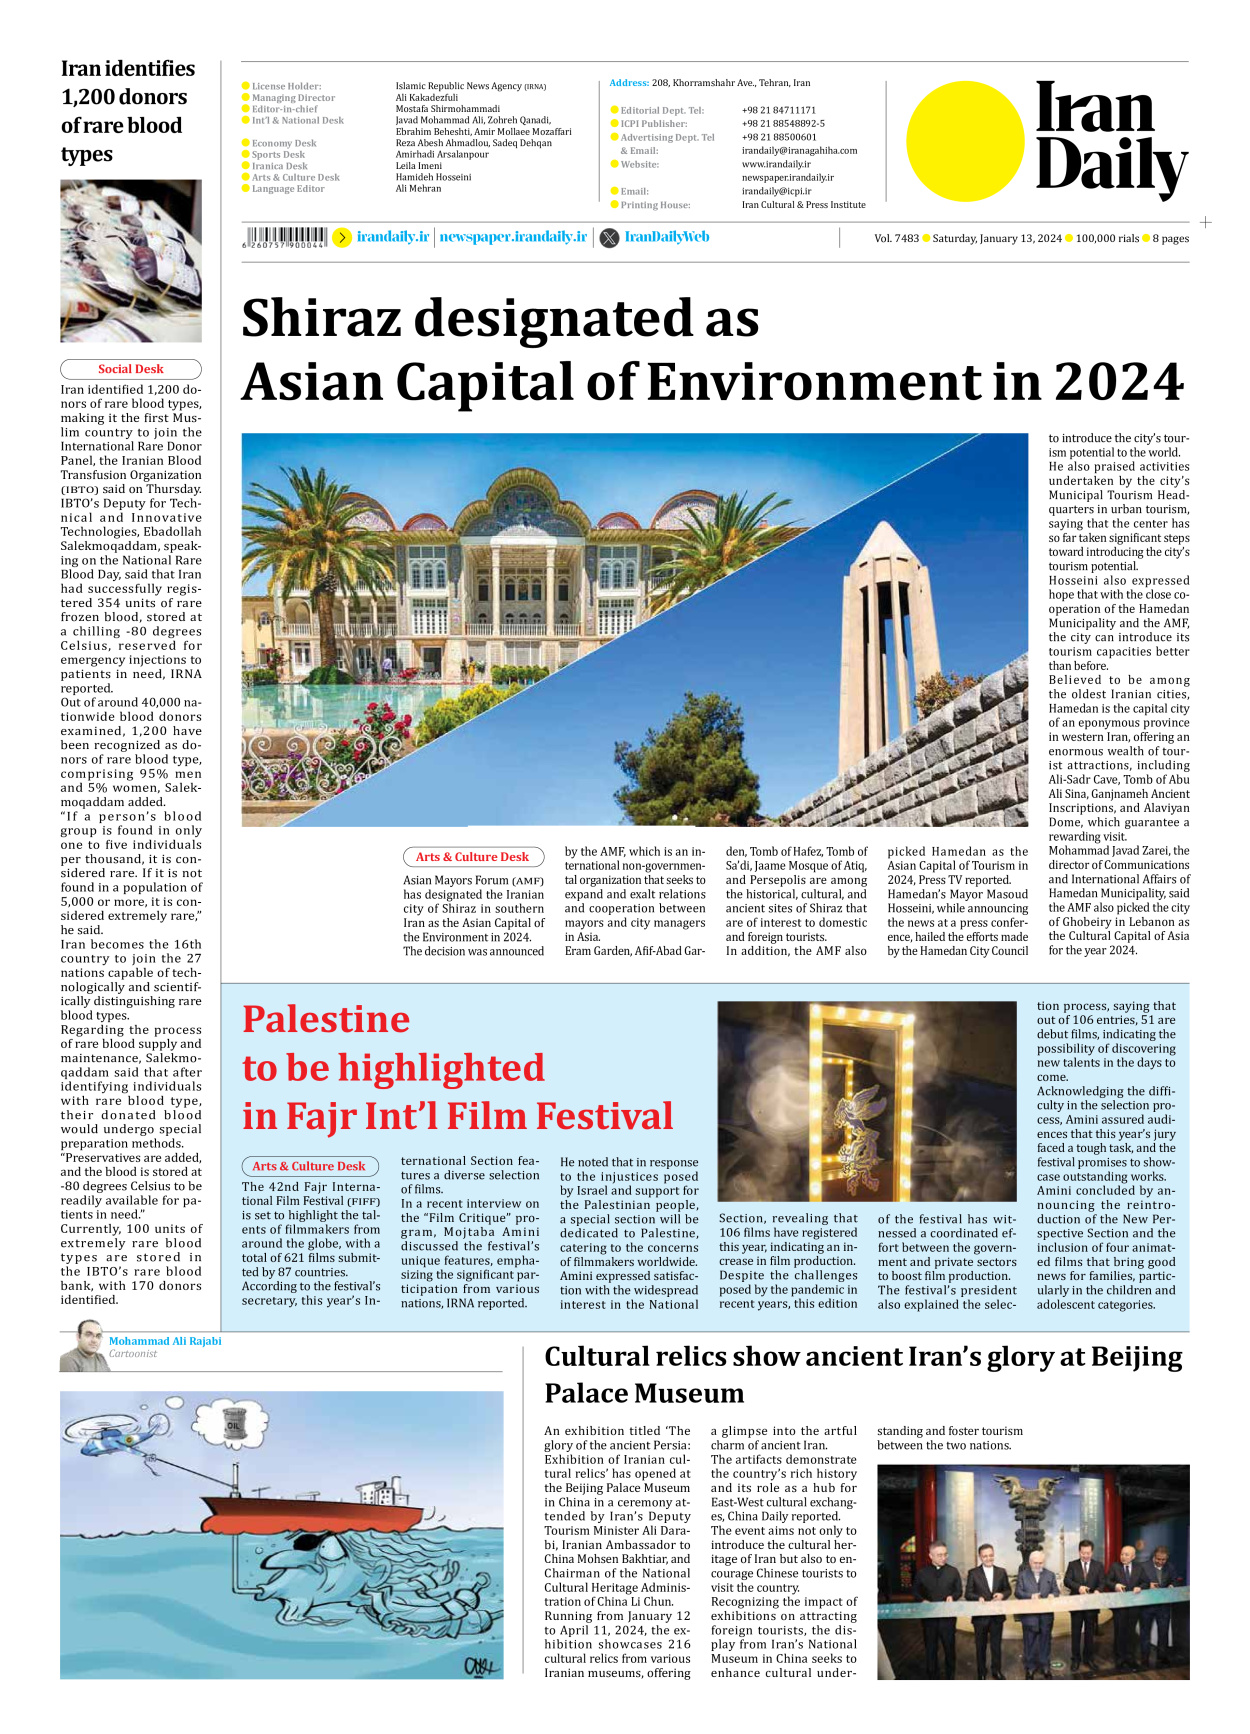 Iran Daily - Number Seven Thousand Four Hundred and Eighty Three - 13 January 2024 - Page 8